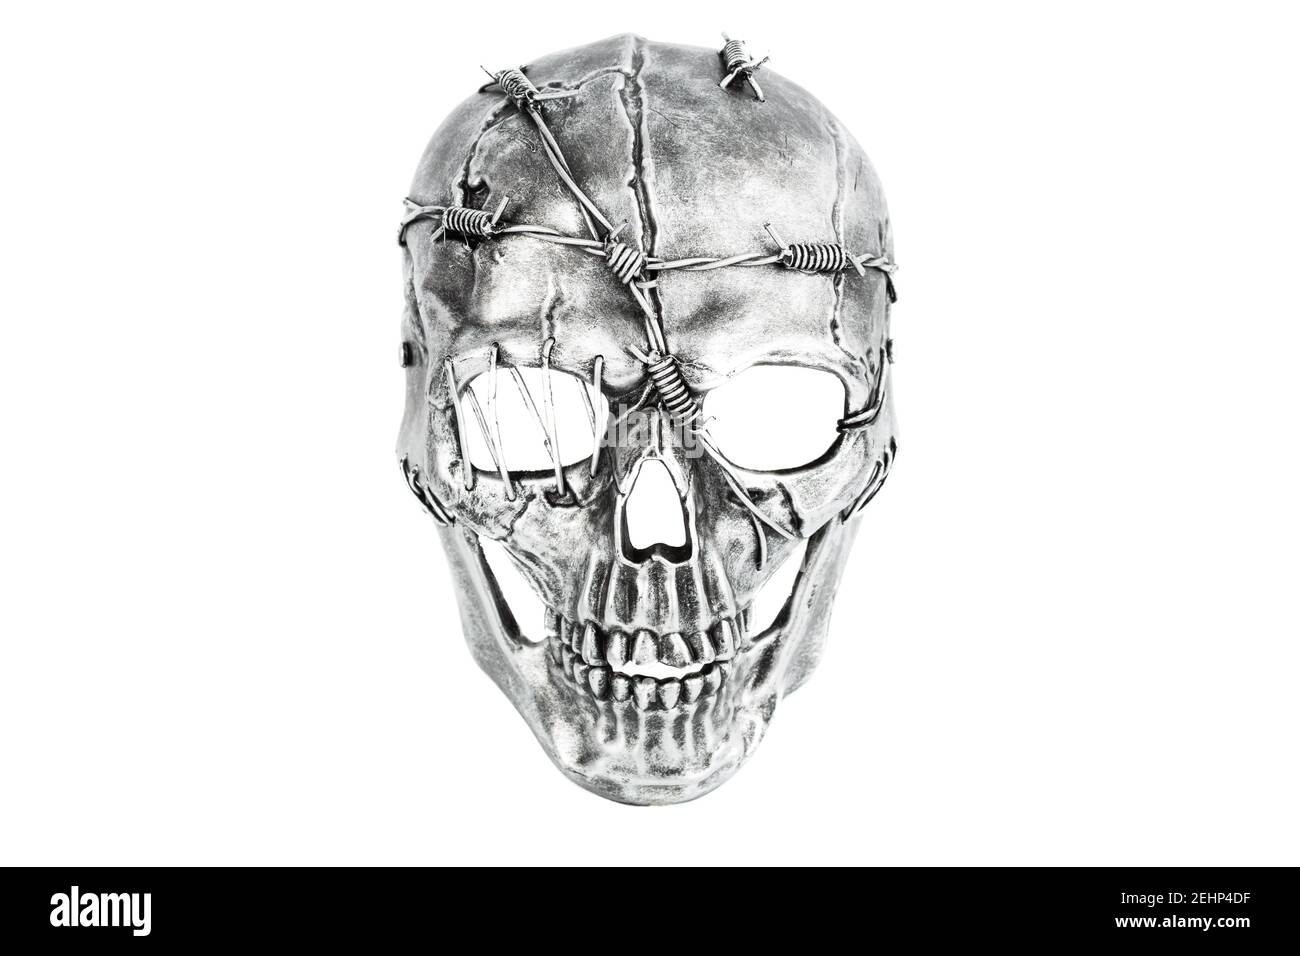 Skull mask with barbed wire isolated on a white background. Stock Photo